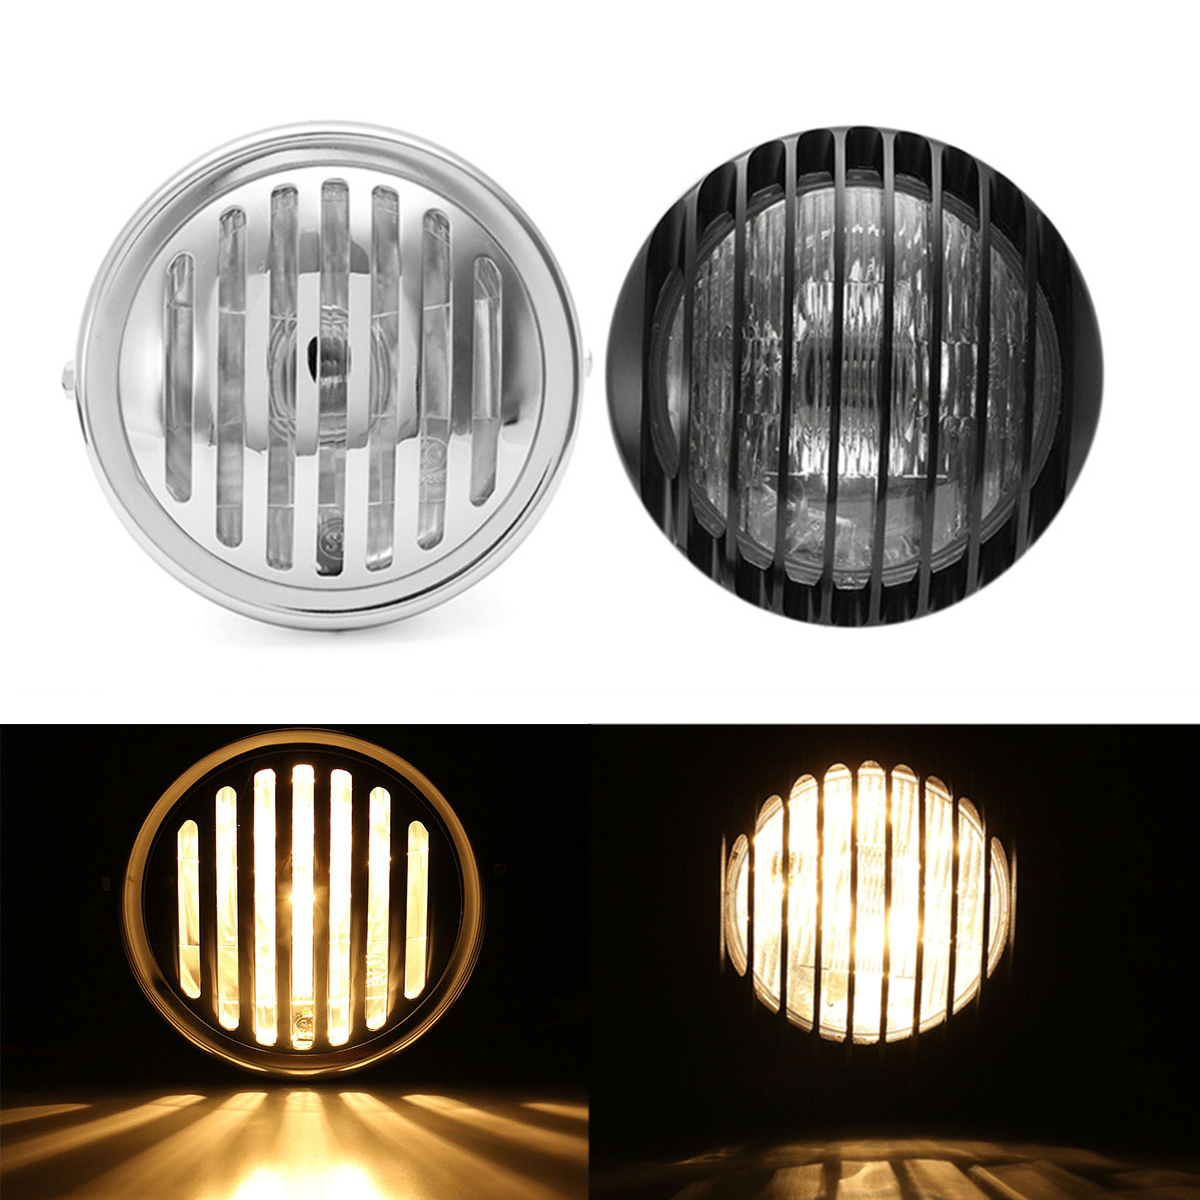 6.5Inch Motorcycle Headlight Retro Grill Guard Metal for Harley Chopper Cafe Racer